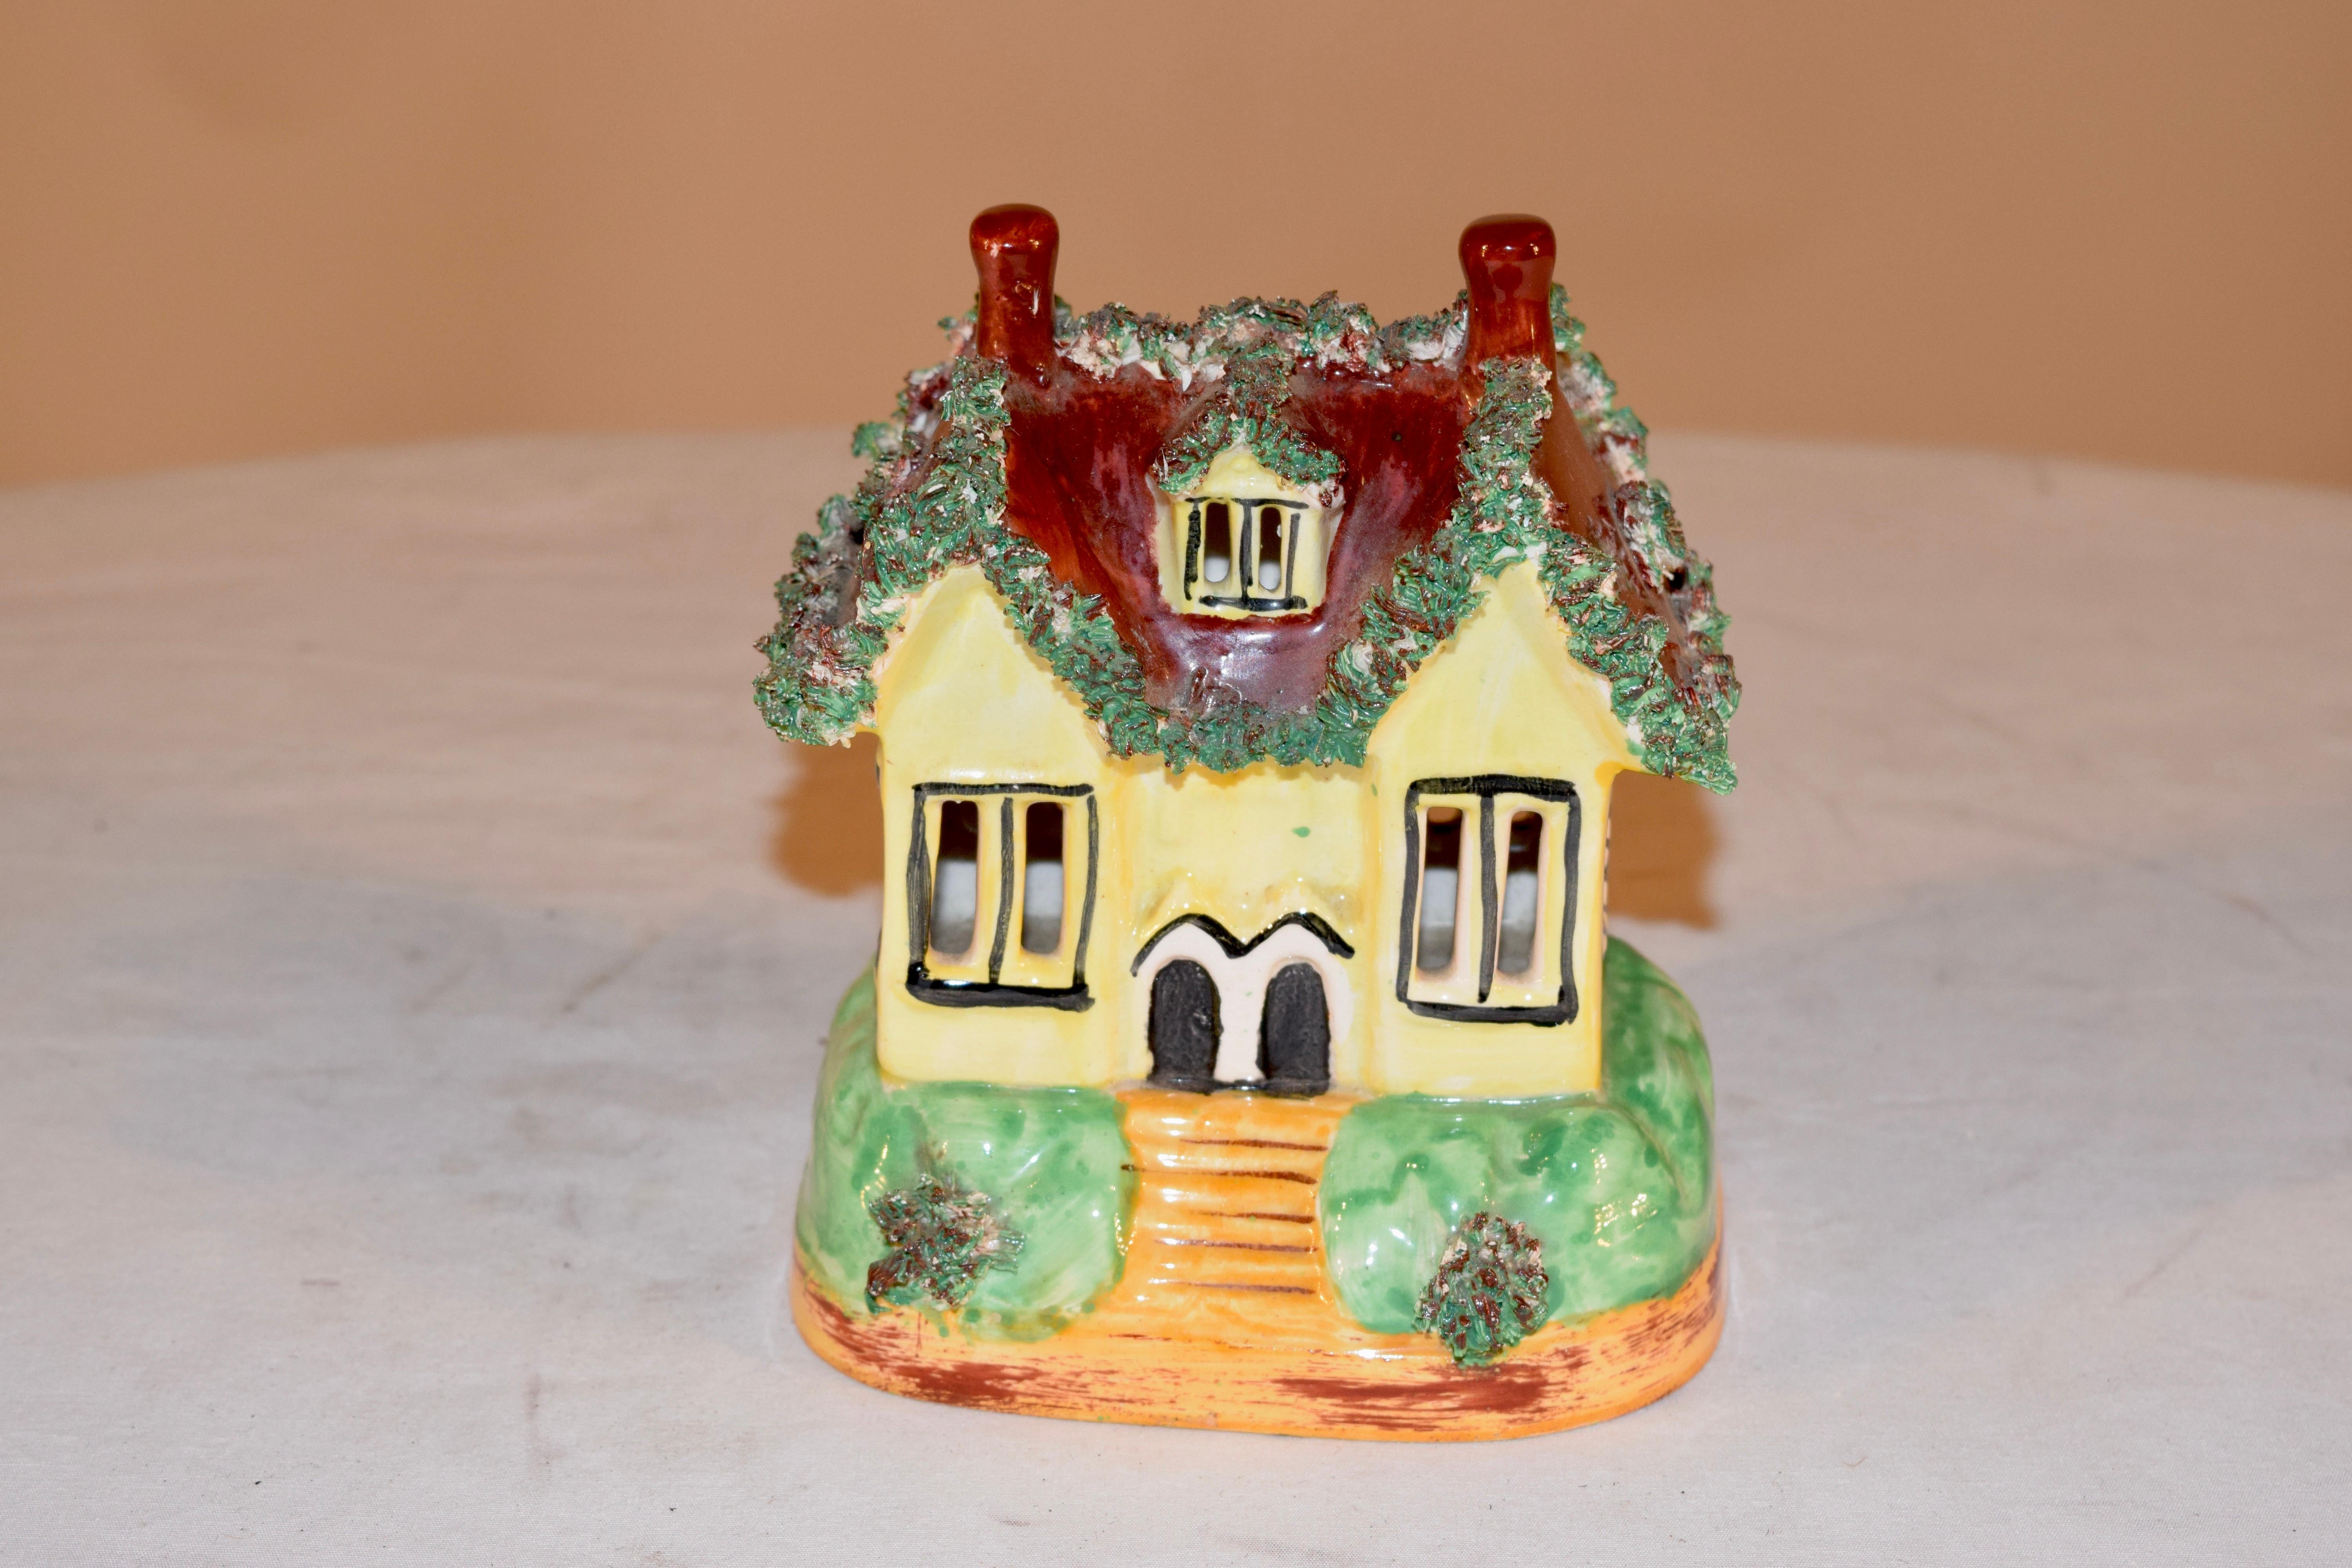 19th century Staffordshire cottage from England with flocking accents along the roofline, which is brown atop a cheery yellow cottage resting on a green base, which also has flocked accents.